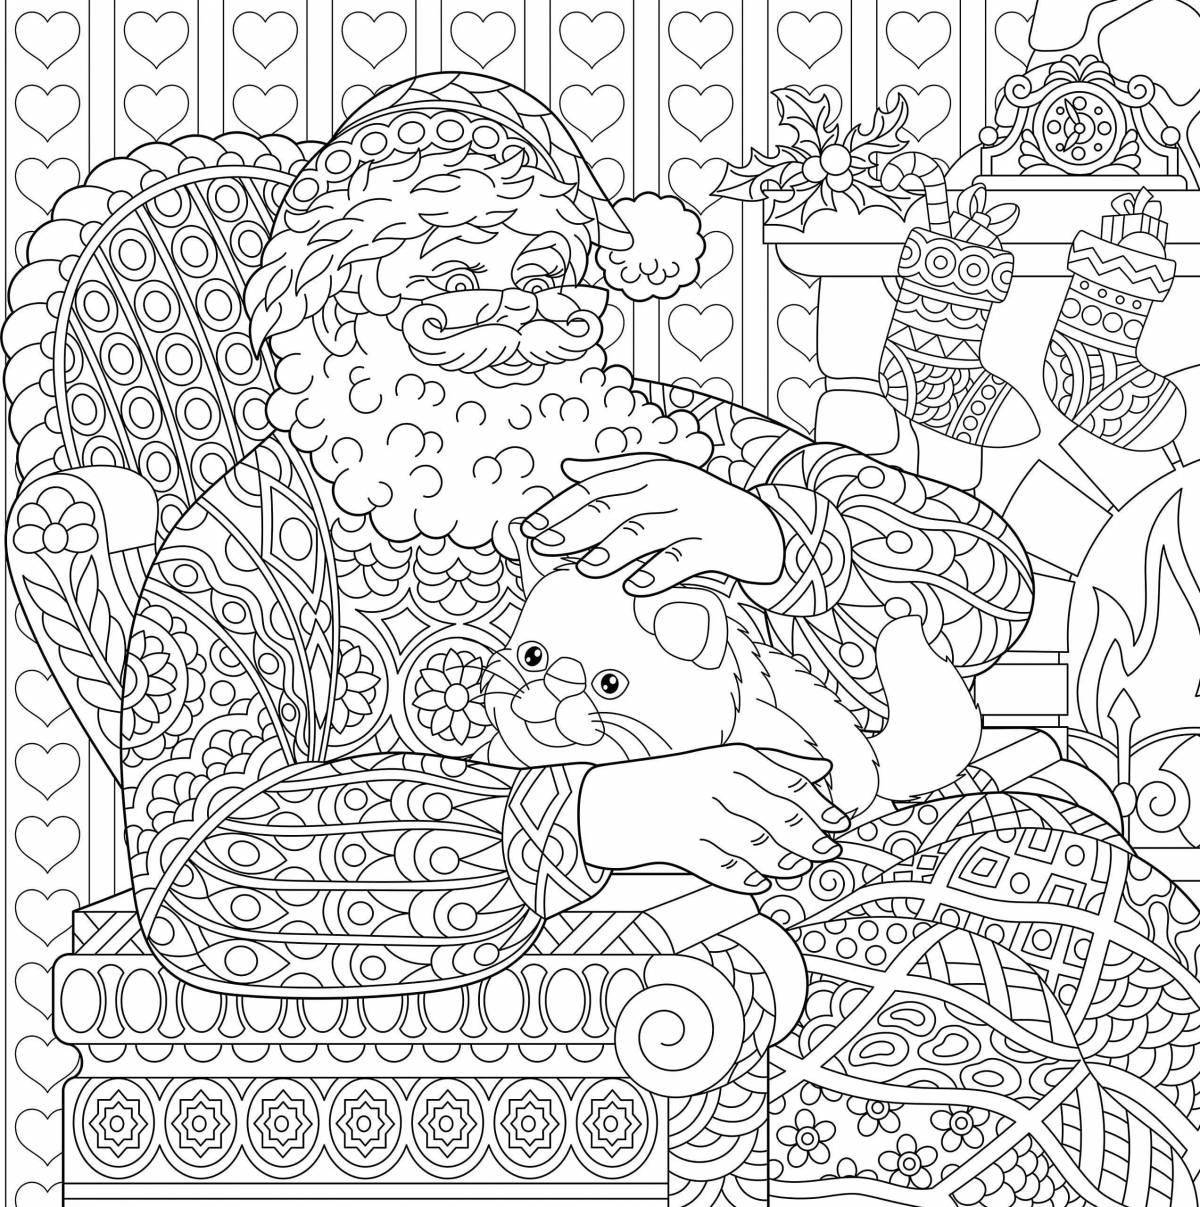 Grand coloring page stress relief christmas